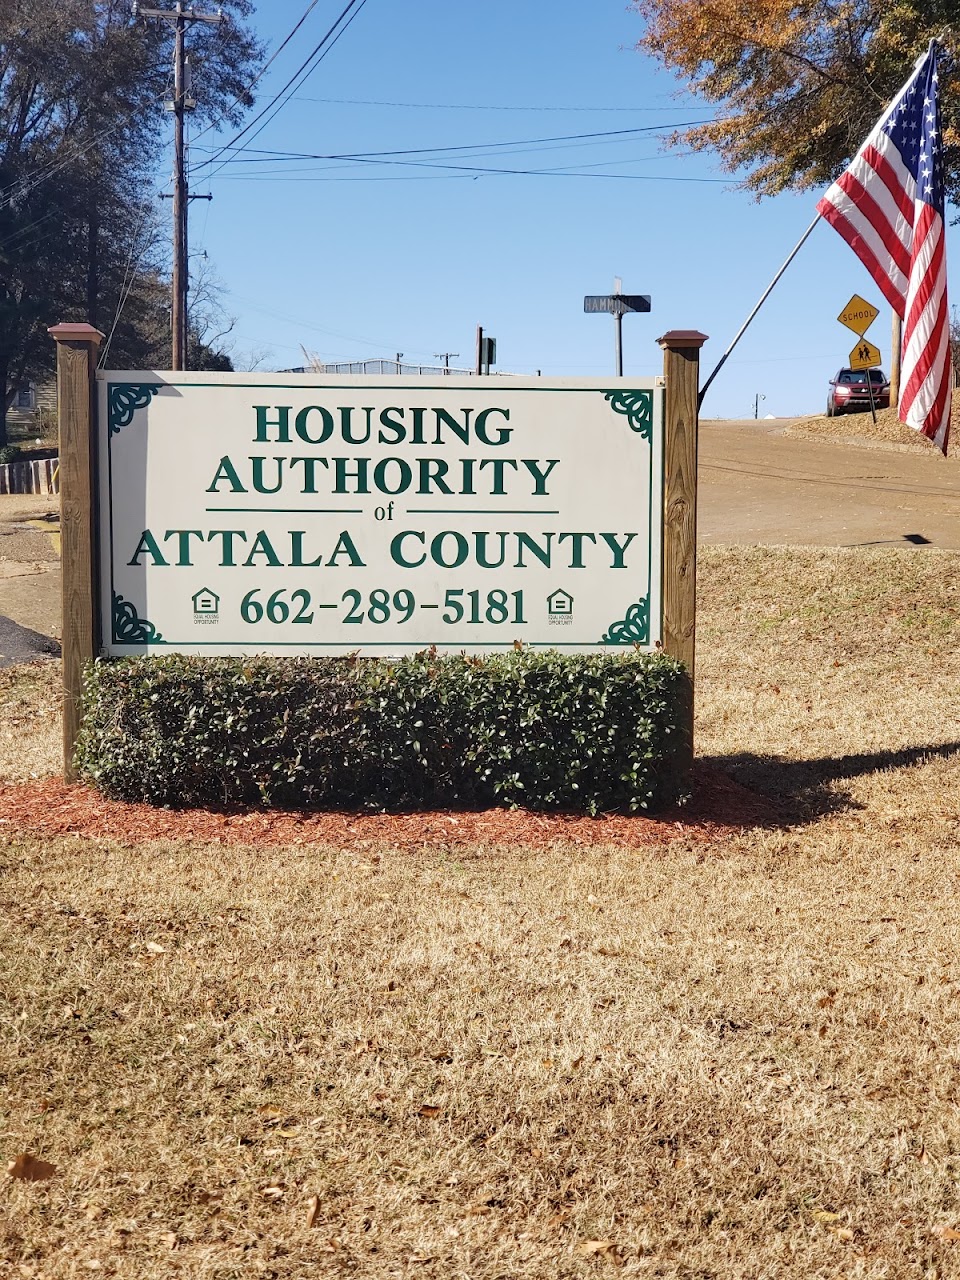 Photo of The Housing Authority of Attala County. Affordable housing located at GILLILAND KOSCIUSKO, MS 39090